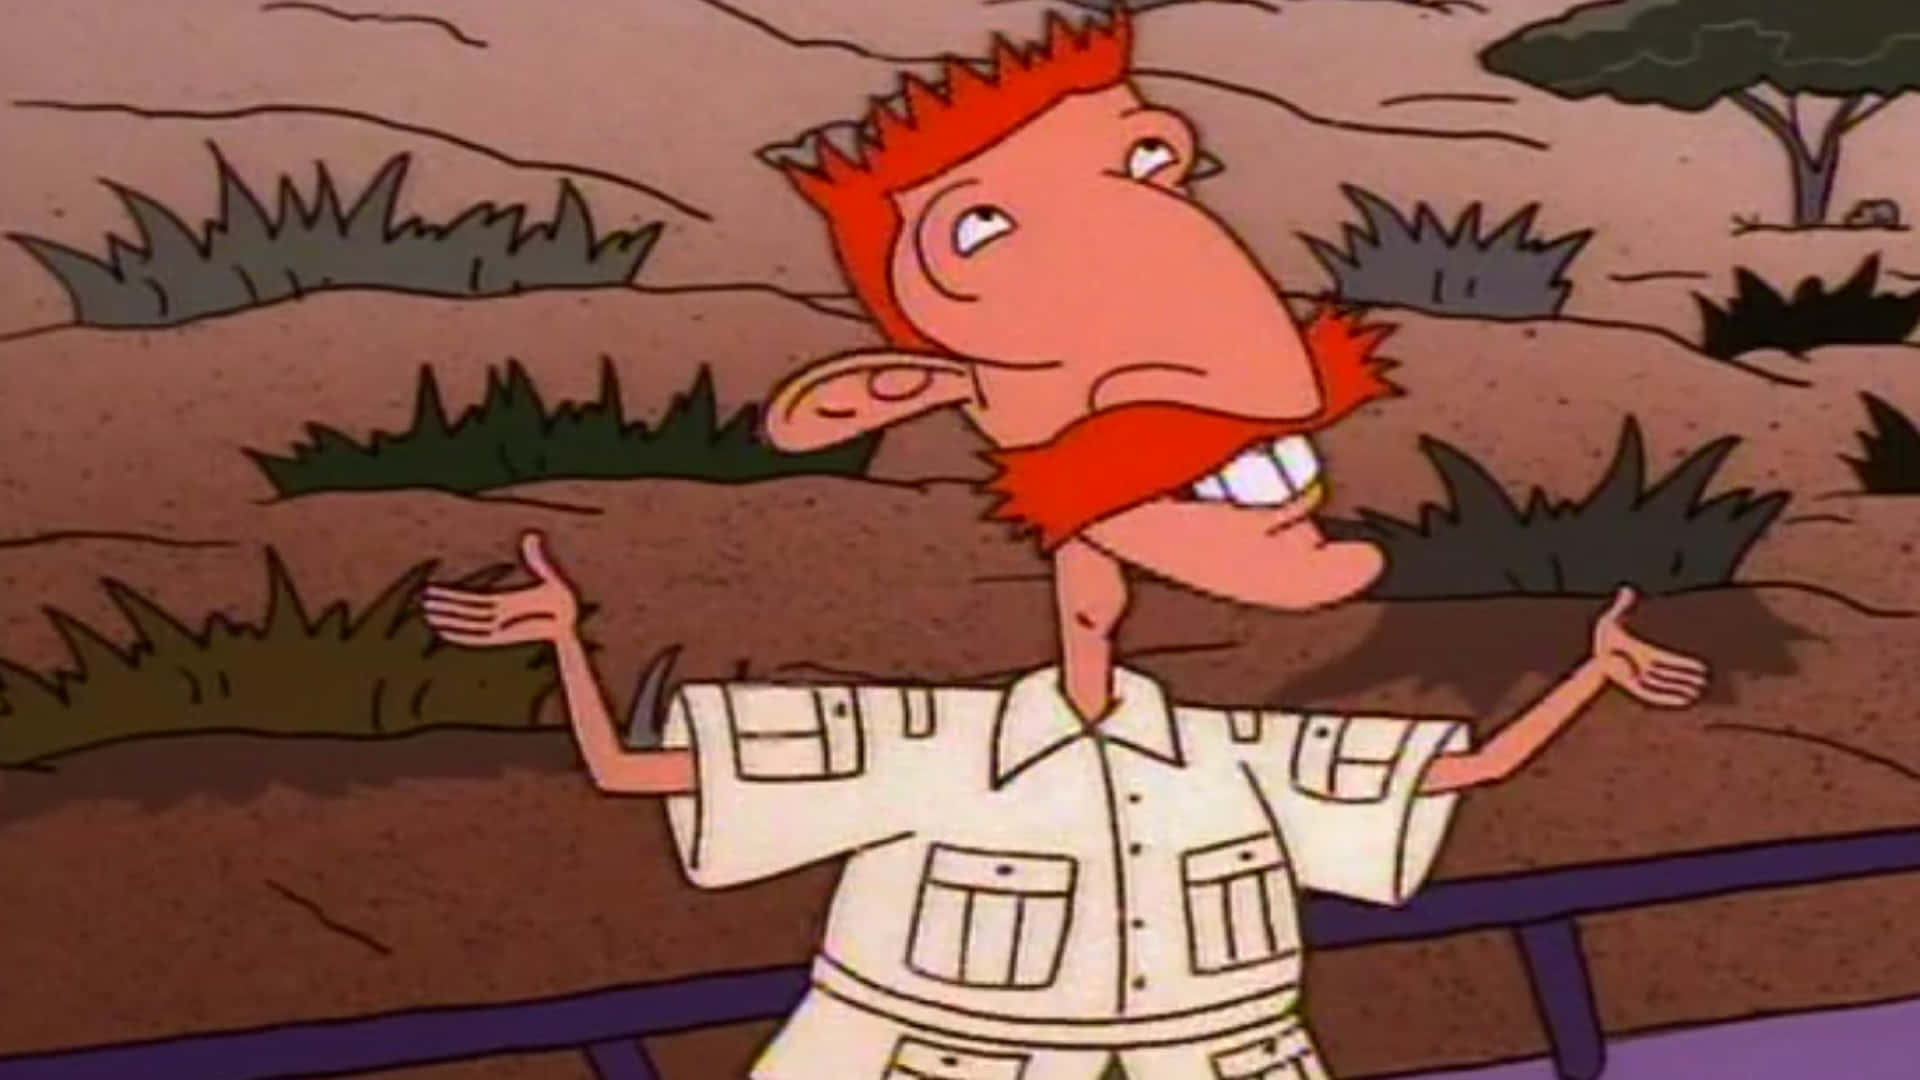 Didyou Mean That The Caption Is Referring To The Character Nigel Thornberry From The Animated Series 